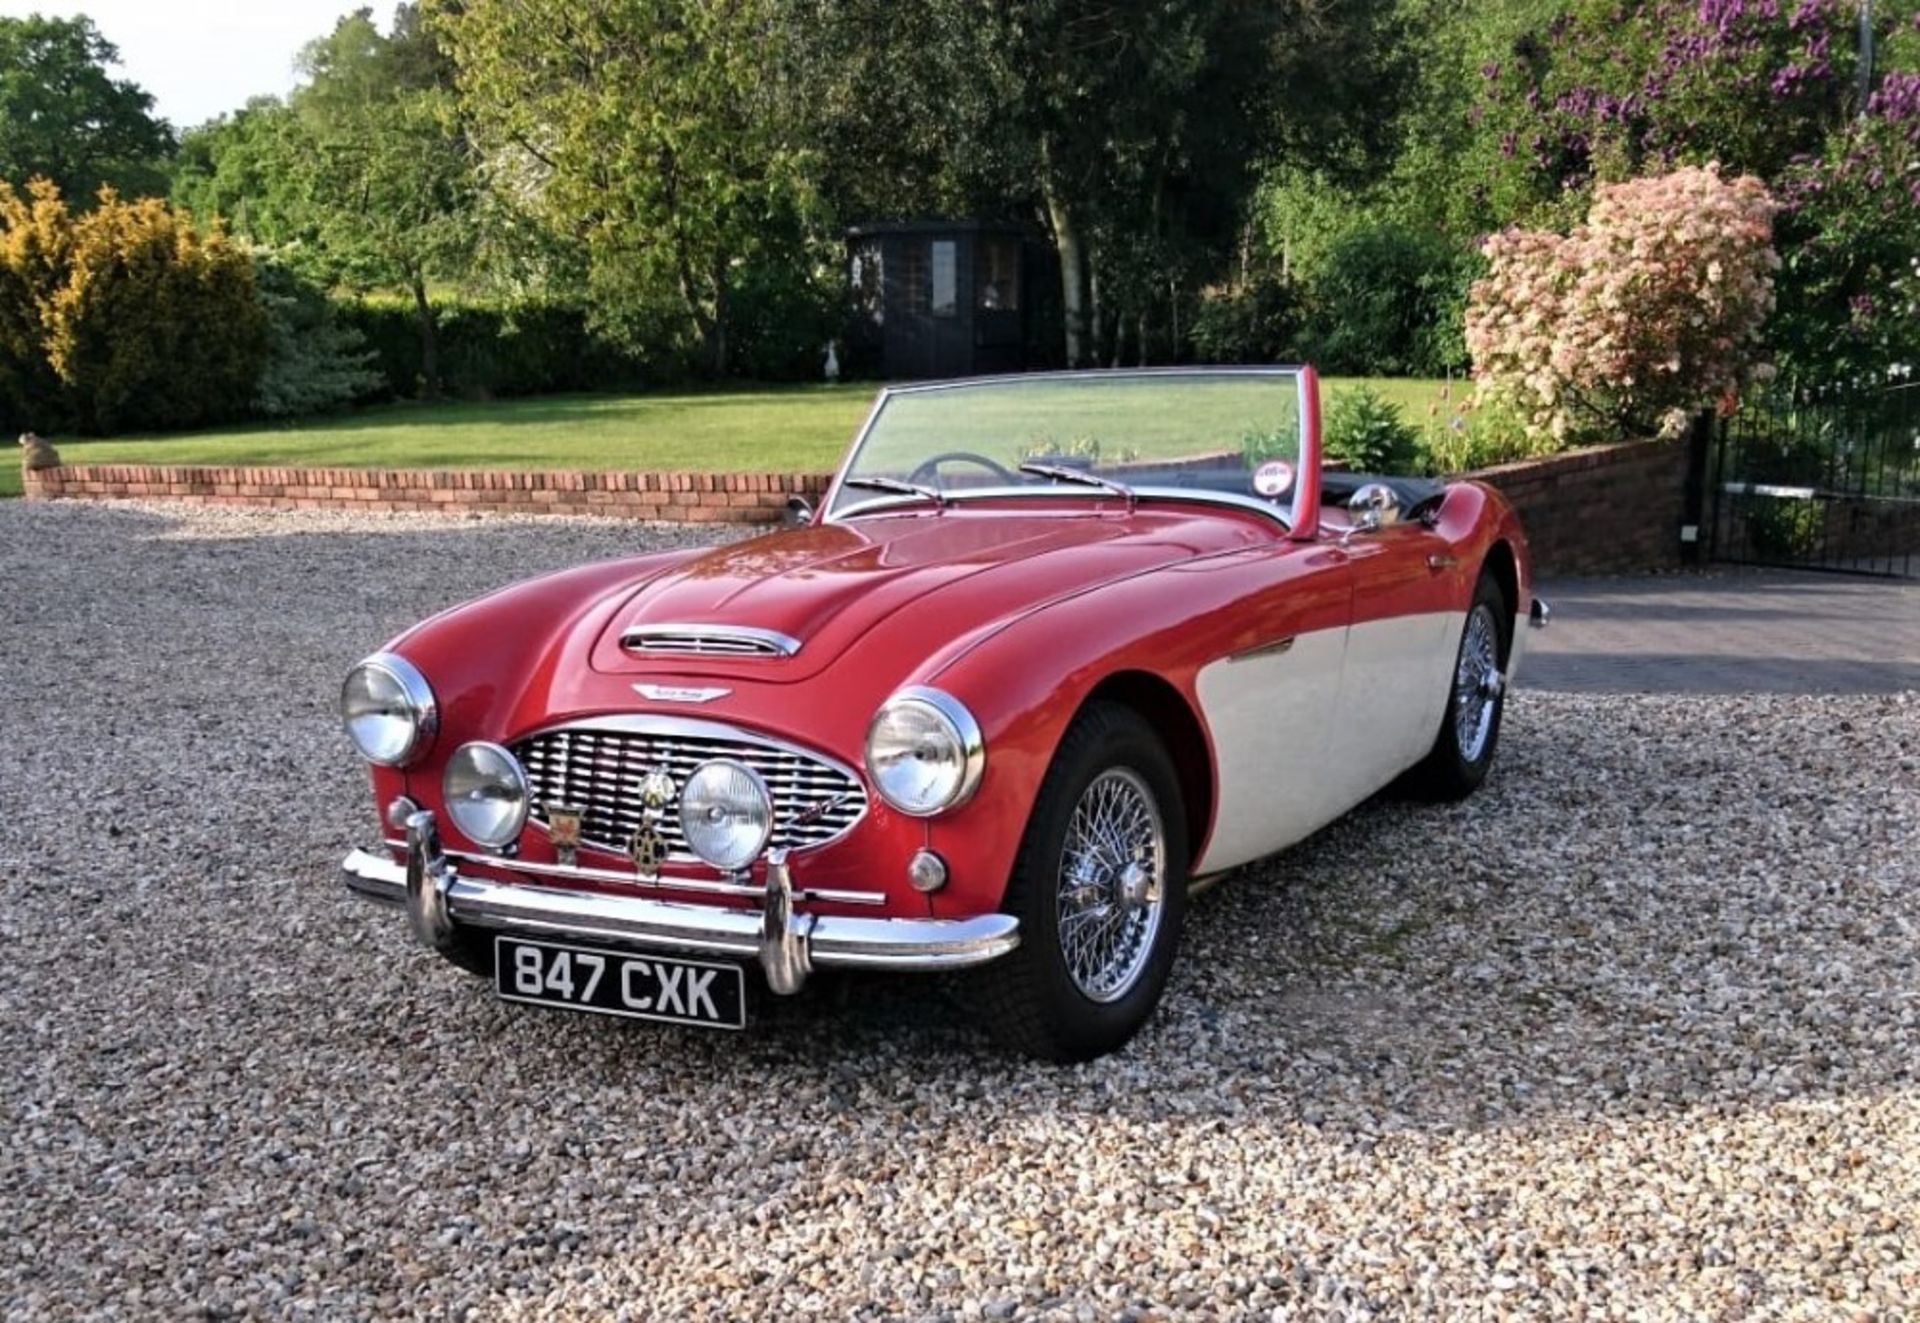 1958 AUSTIN-HEALEY 100/6 Registration Number: 847 CXK Chassis Number: BN6/2341 Recorded Mileage: - Image 2 of 18